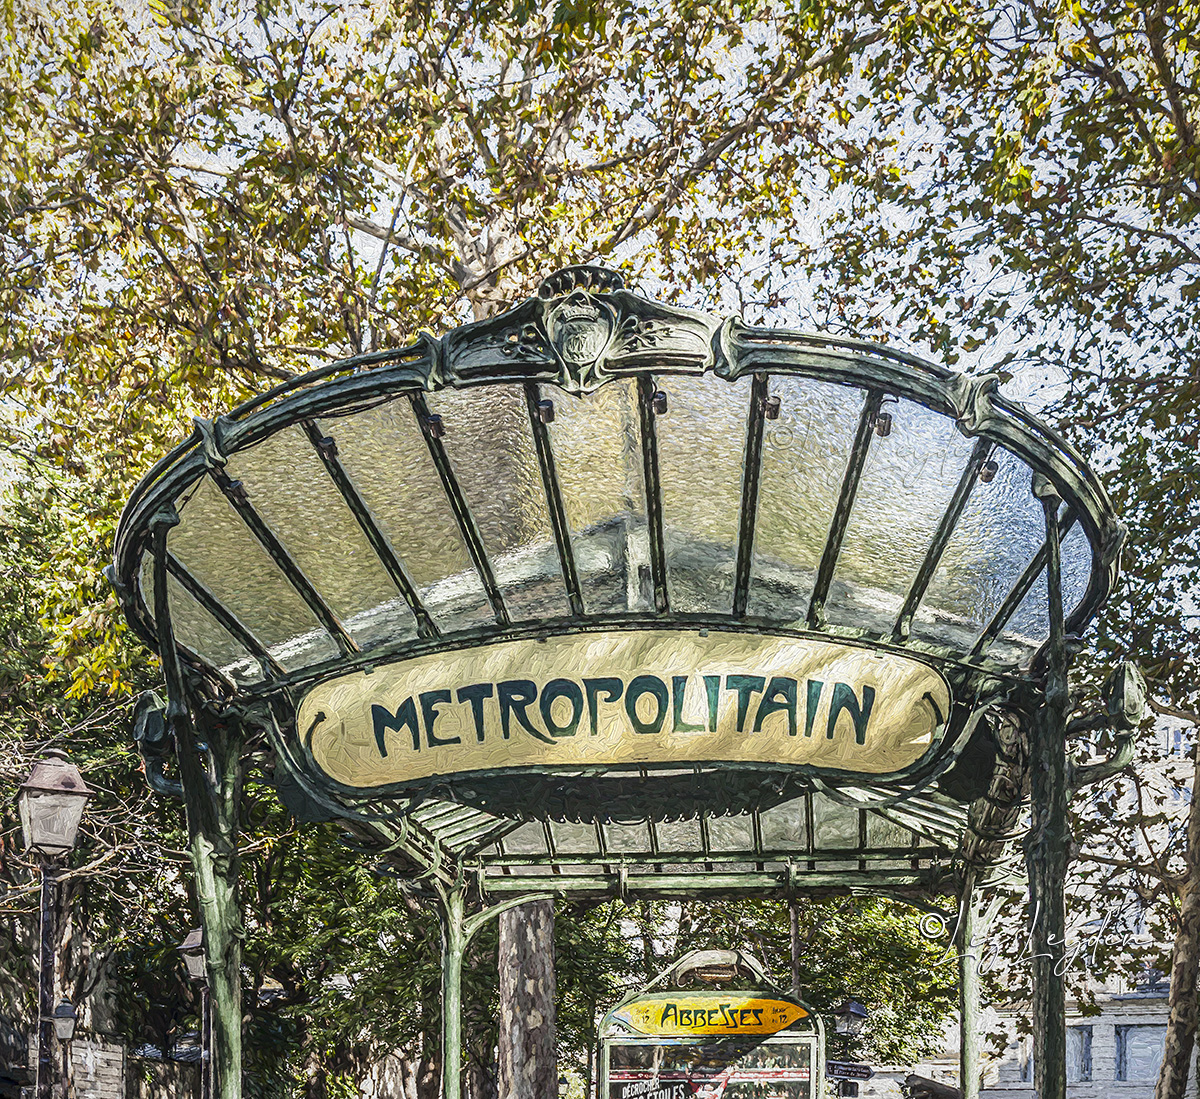 The classis Metro sign at Abbesses, Paris, France